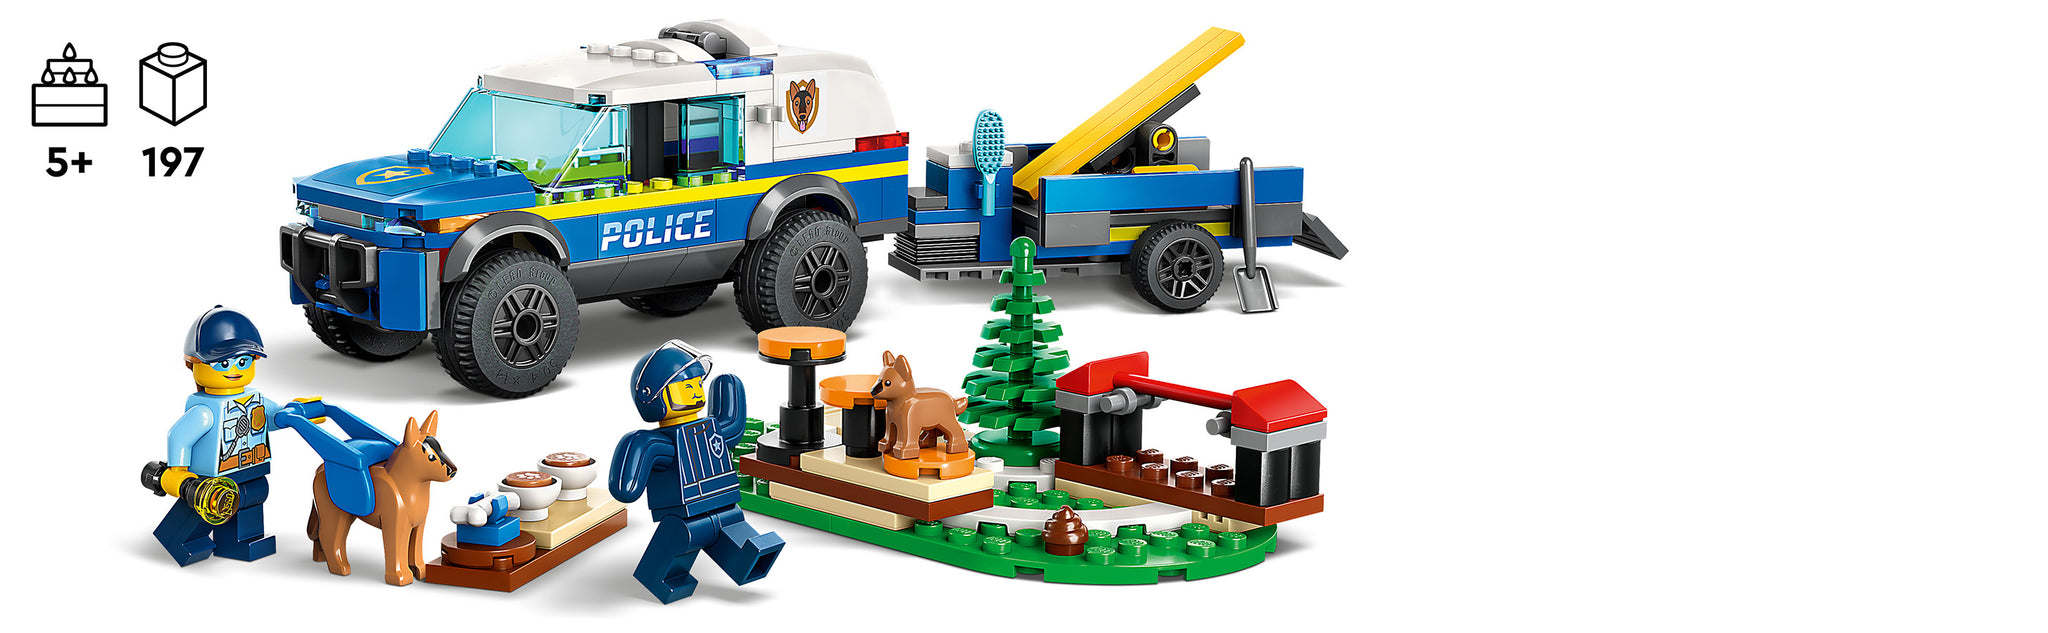 LEGO 60369 Mobile Police Dog Training Kids and dog lovers aged 5 and up will love this LEGO® City Mobile Police Dog Training (60369) playset. The set is packed with inspiration for imaginative play and includes an all-terrain vehicle, trailer and 3 dog play equipment: a see-saw, obstacle and stepping feet. Add the police officers and the figures of an adult dog and a puppy and the fun can begin. An engaging build and play experience Includes simple printed building instructions with pictures and the LEGO Builder app – a digital building companion with intuitive zoom and rotate functions that let kids see their model from all sides as they build. The creative world of LEGO City LEGO City Police playsets give kids a fun build and play experience with detailed buildings, realistic vehicles and characters that encourage imaginative role play.